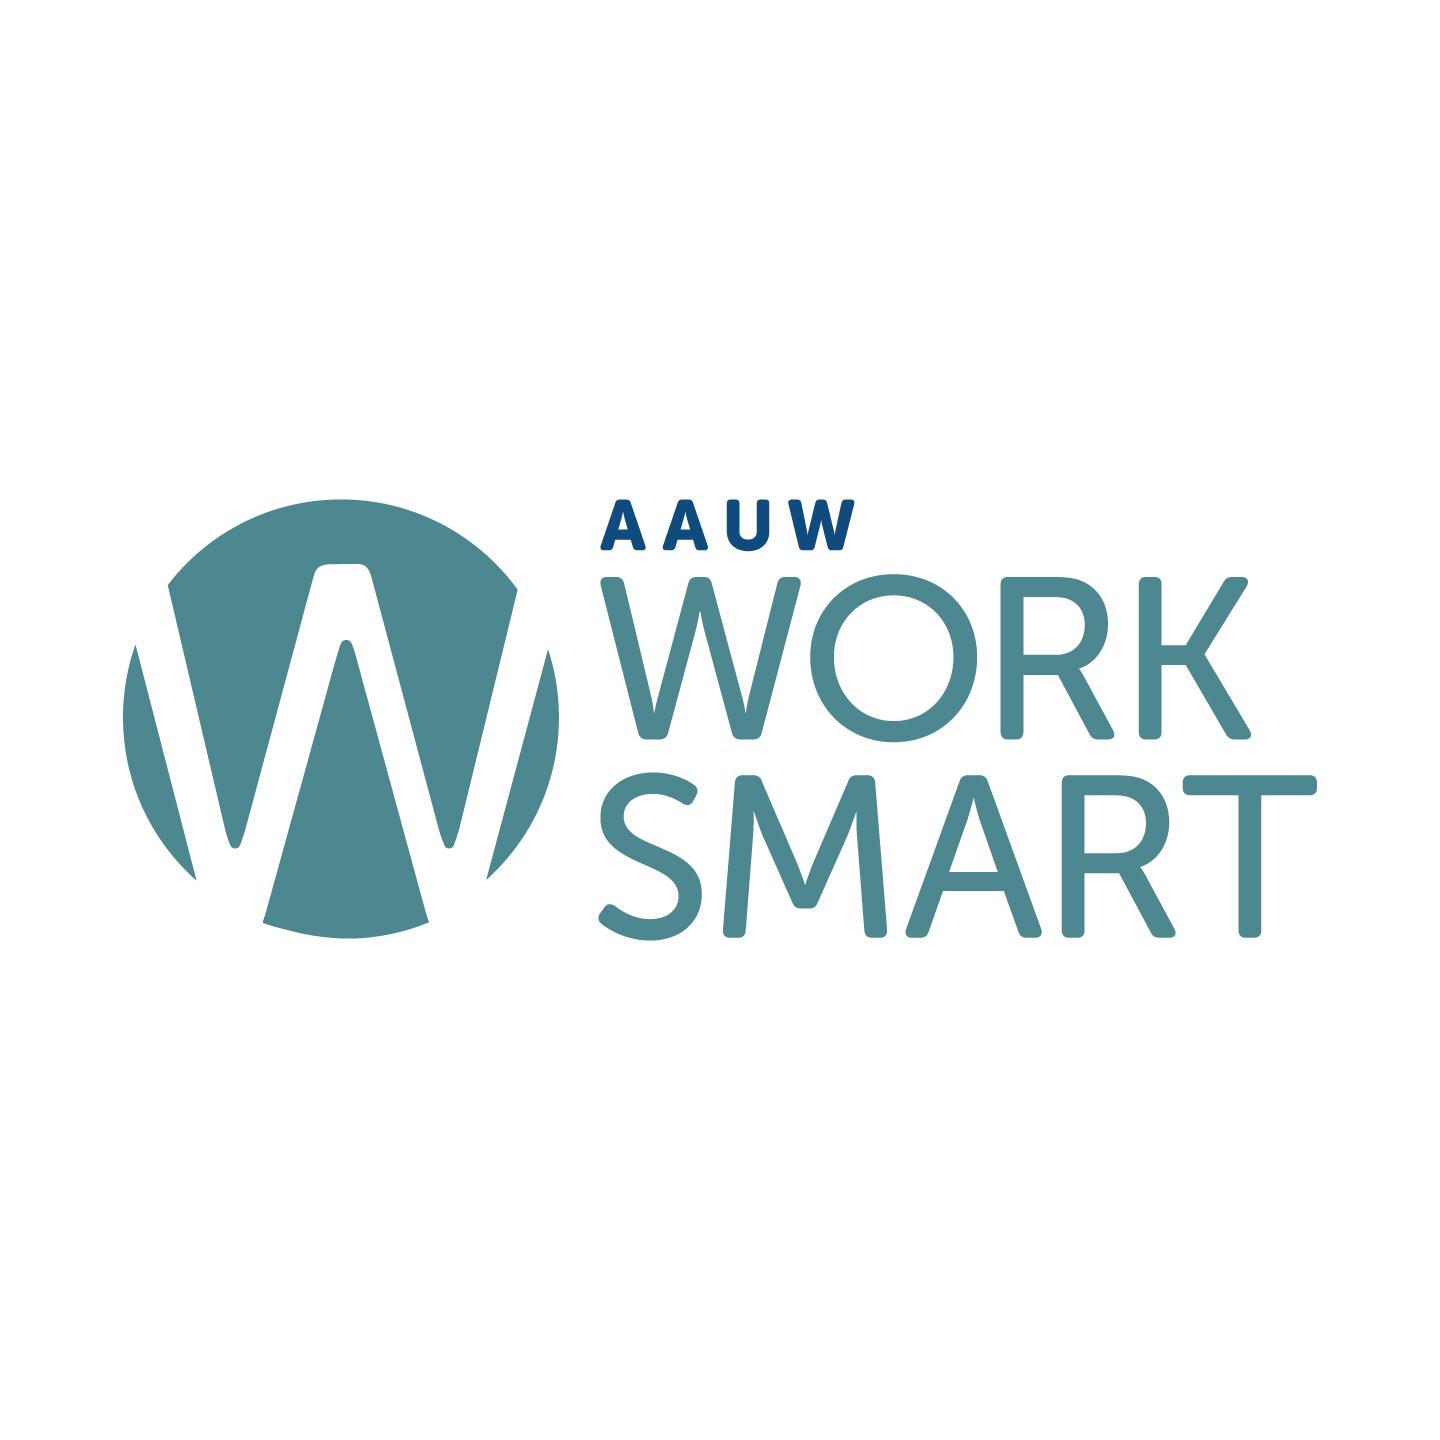 AAUW Work Smart in Boston at MassHire Downtown Boston Career Center